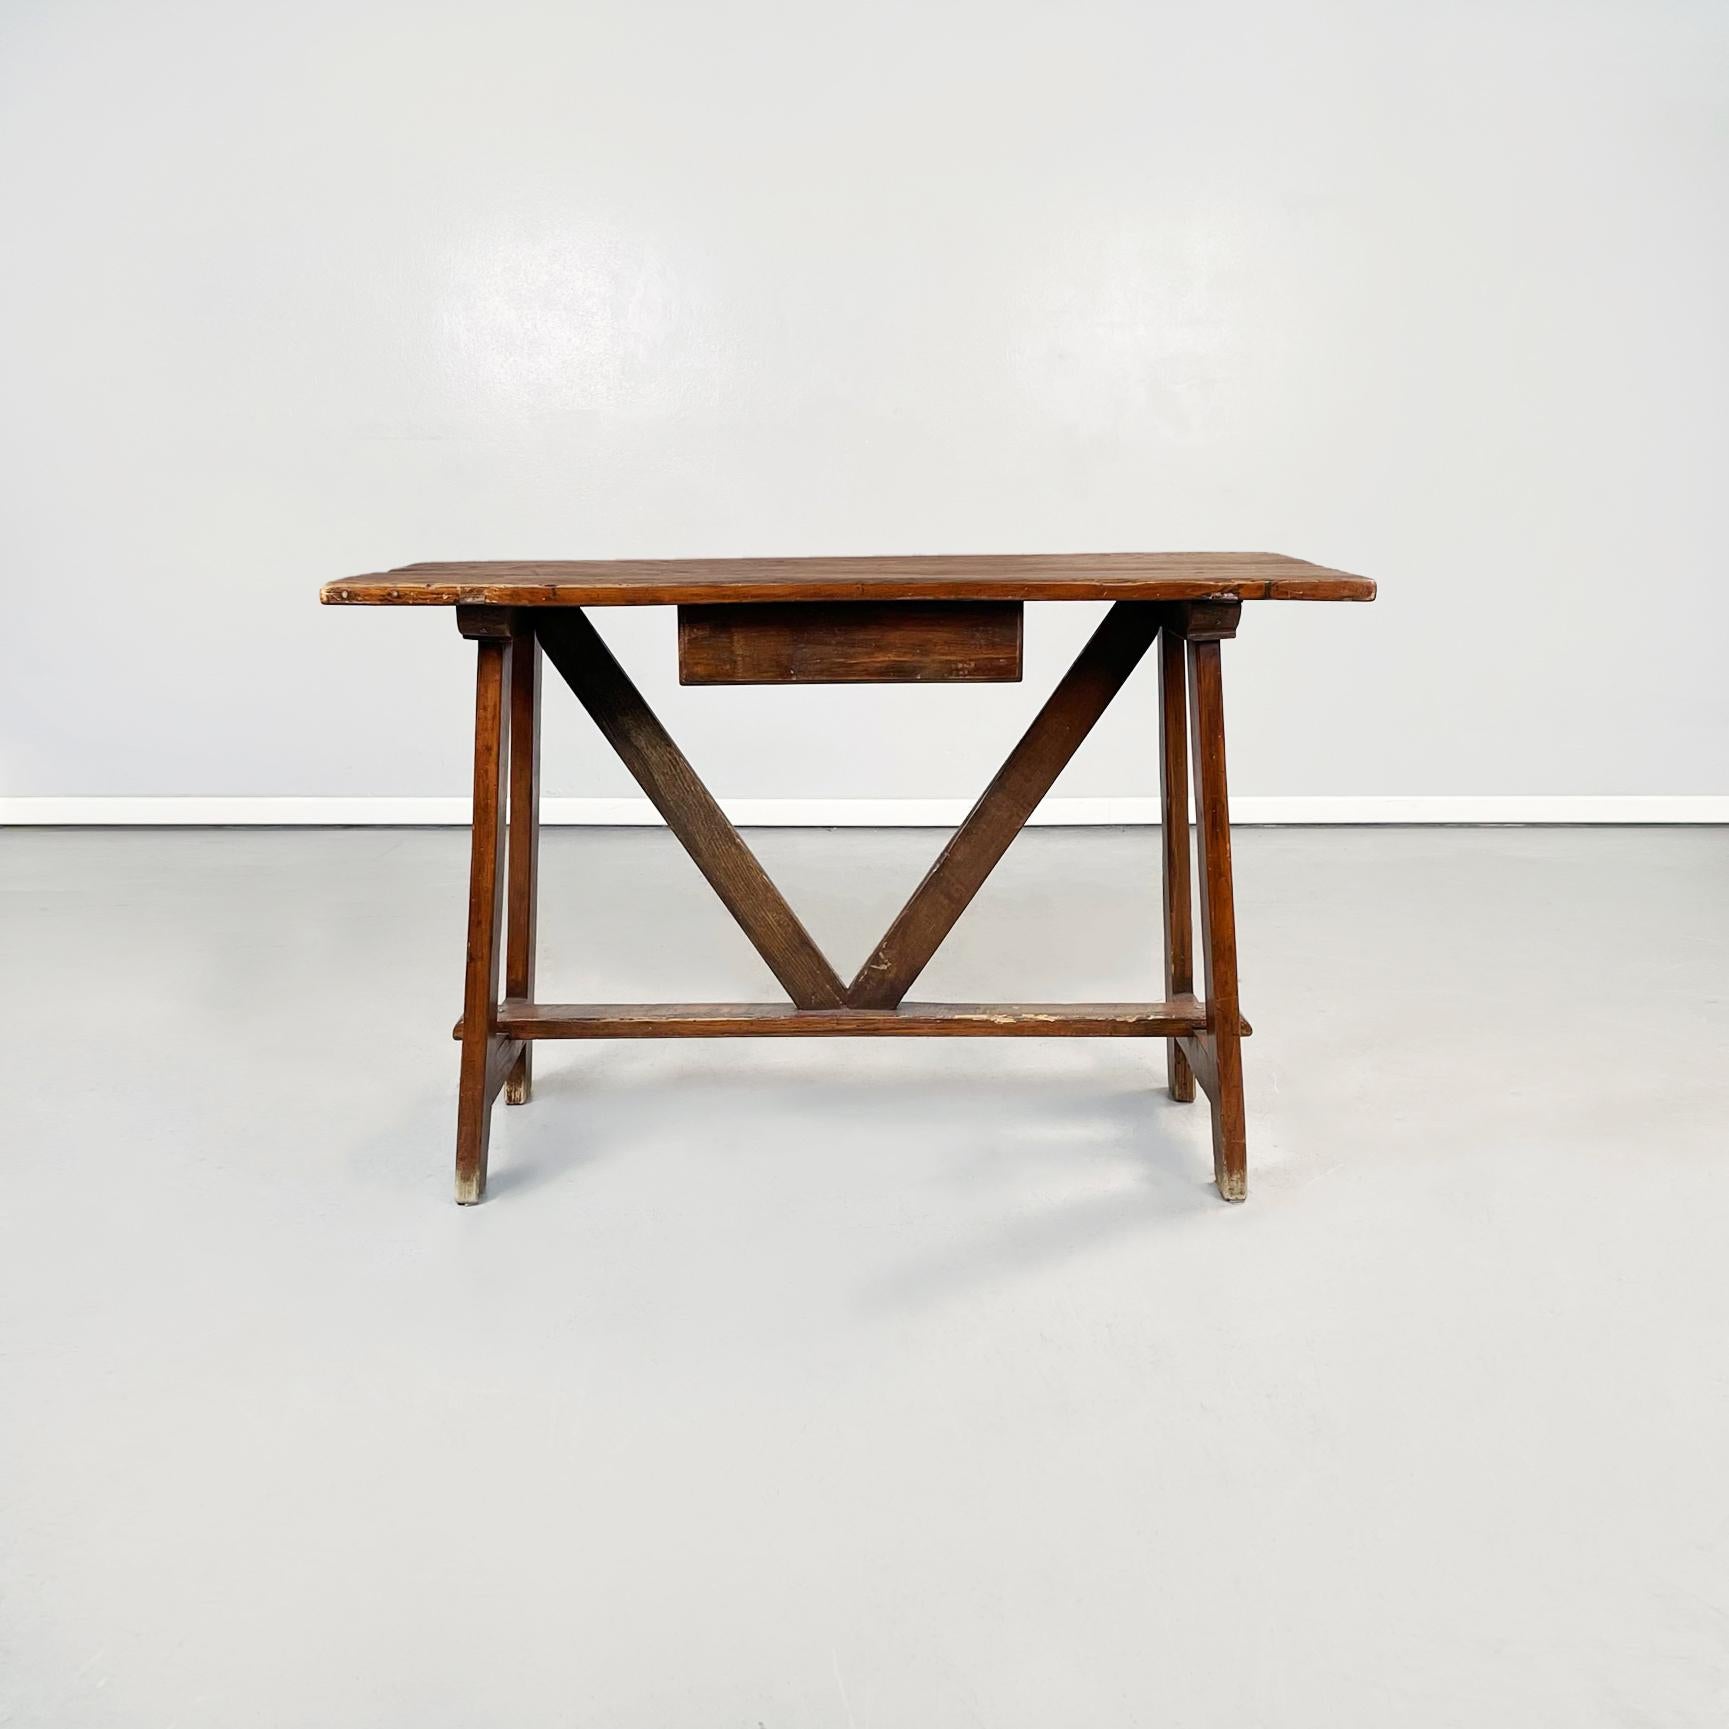 20th Century Italian Antique Wooden Table Fratino with a Drawer, 1900s For Sale